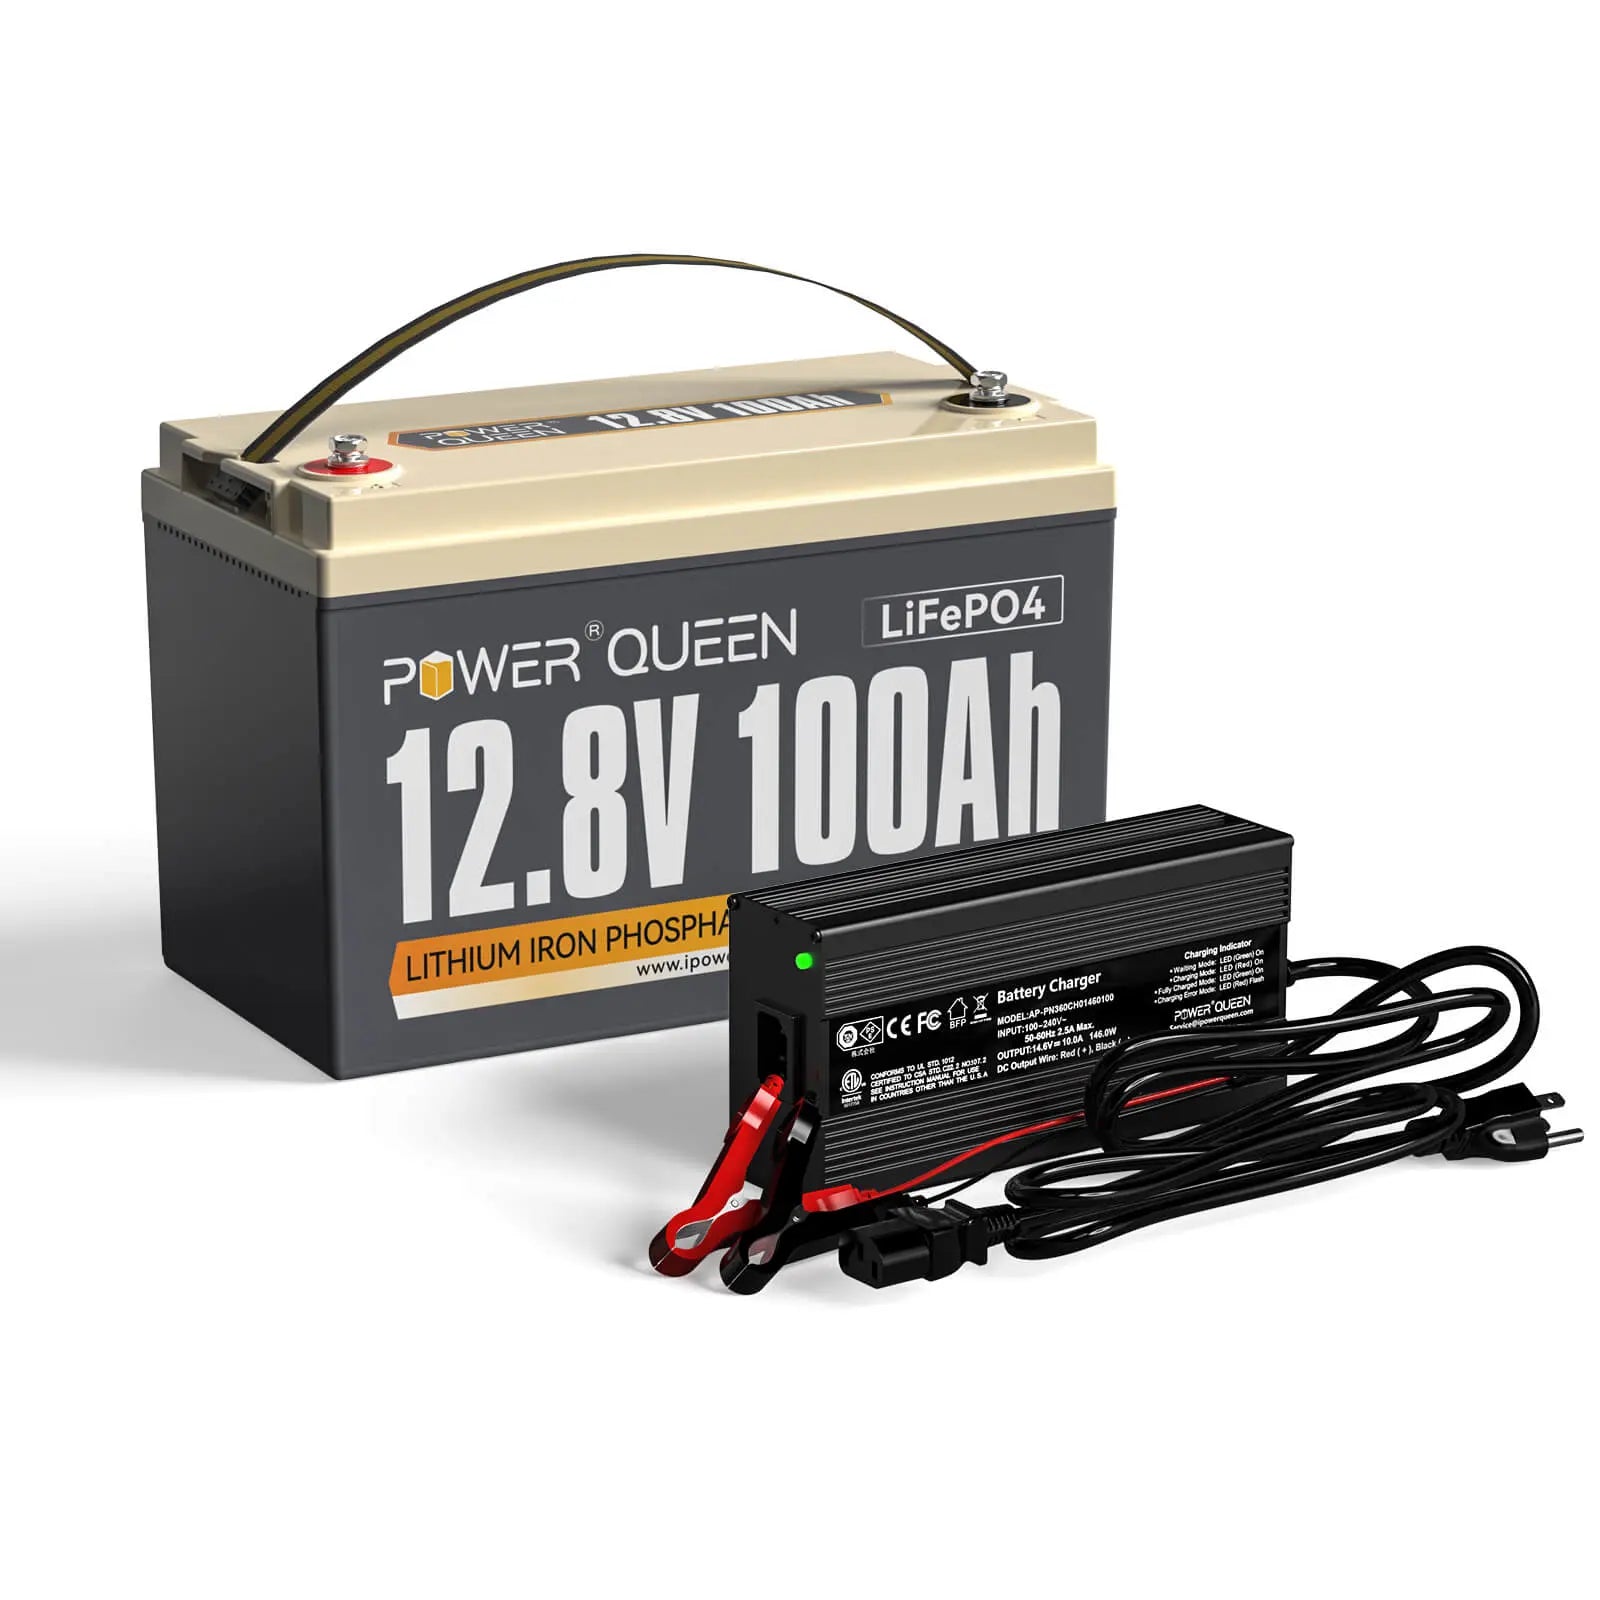 Power Queen 12V 100Ah LiFePO4 Battery + 14.6V 10A Charger